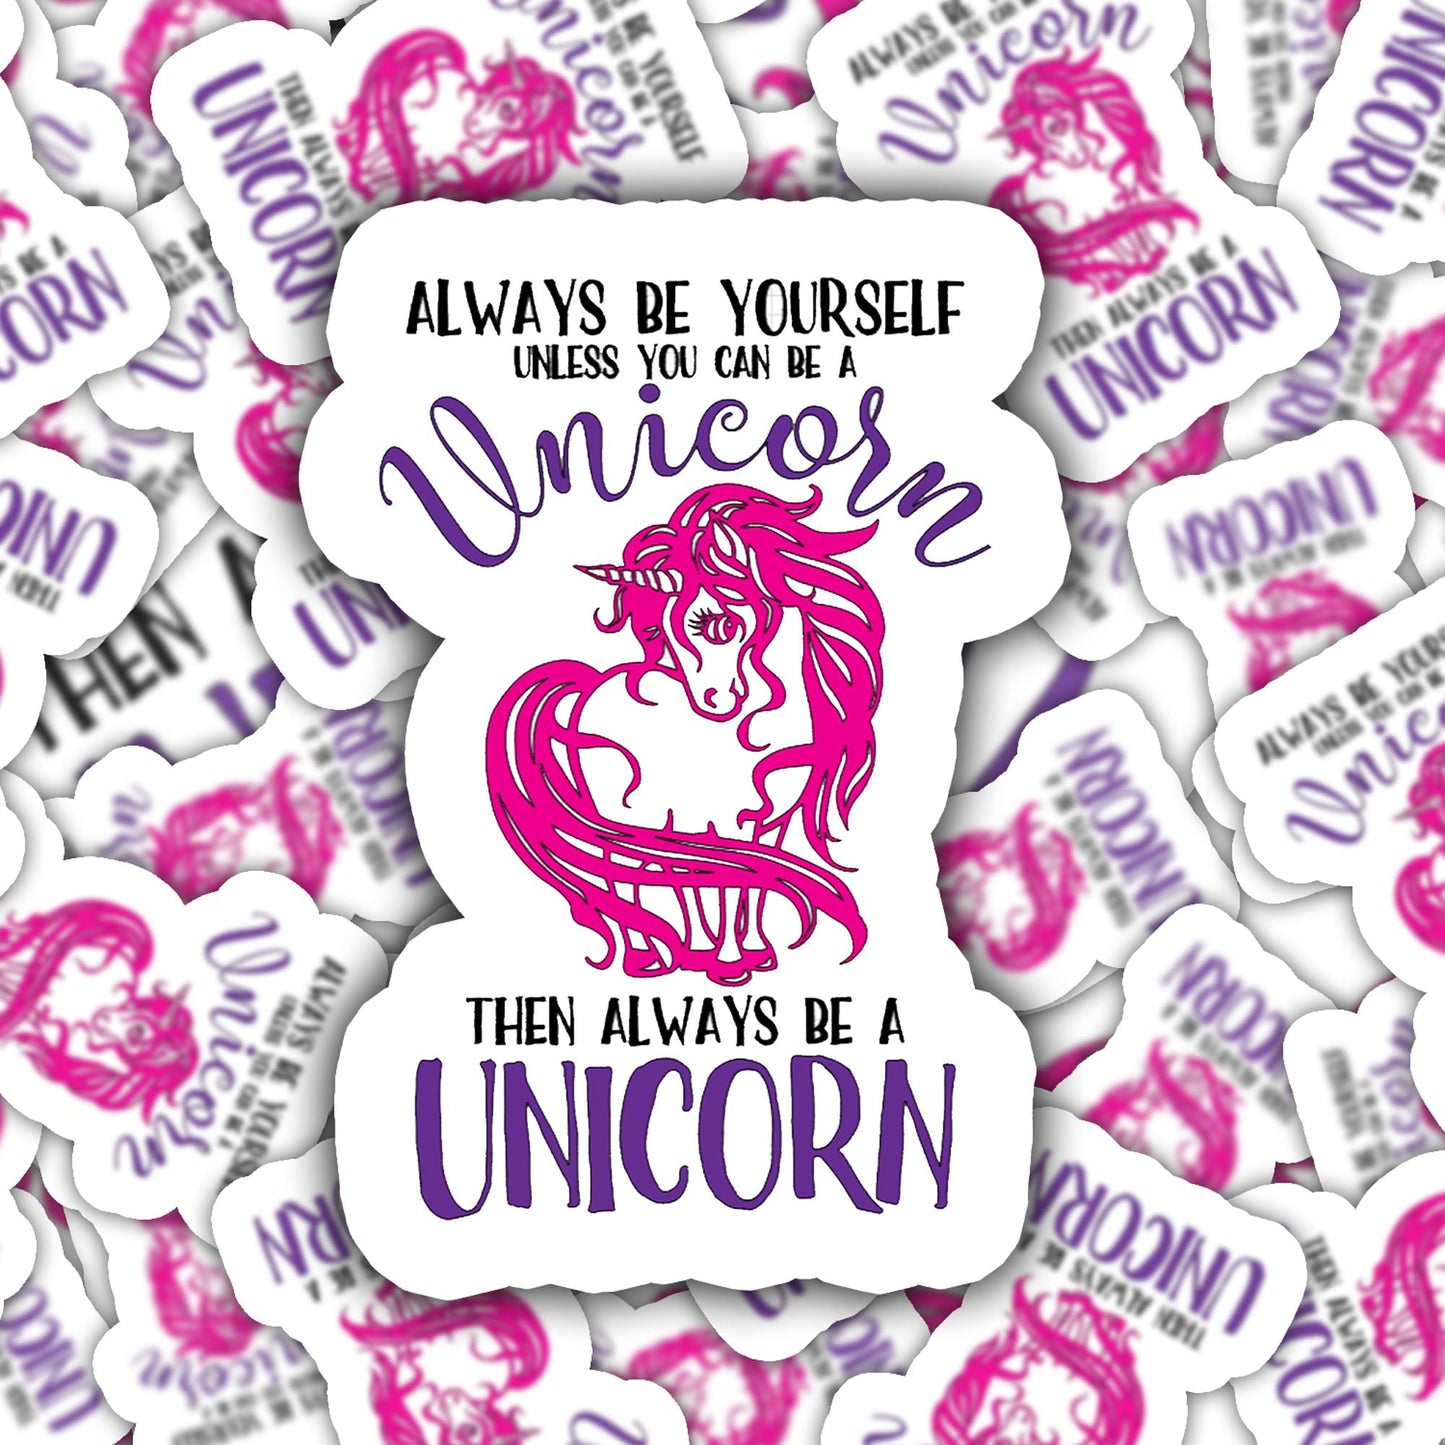 Always Be Yourself Unless You Can Be a Unicorn-sticker-Crimson and Clover Studio